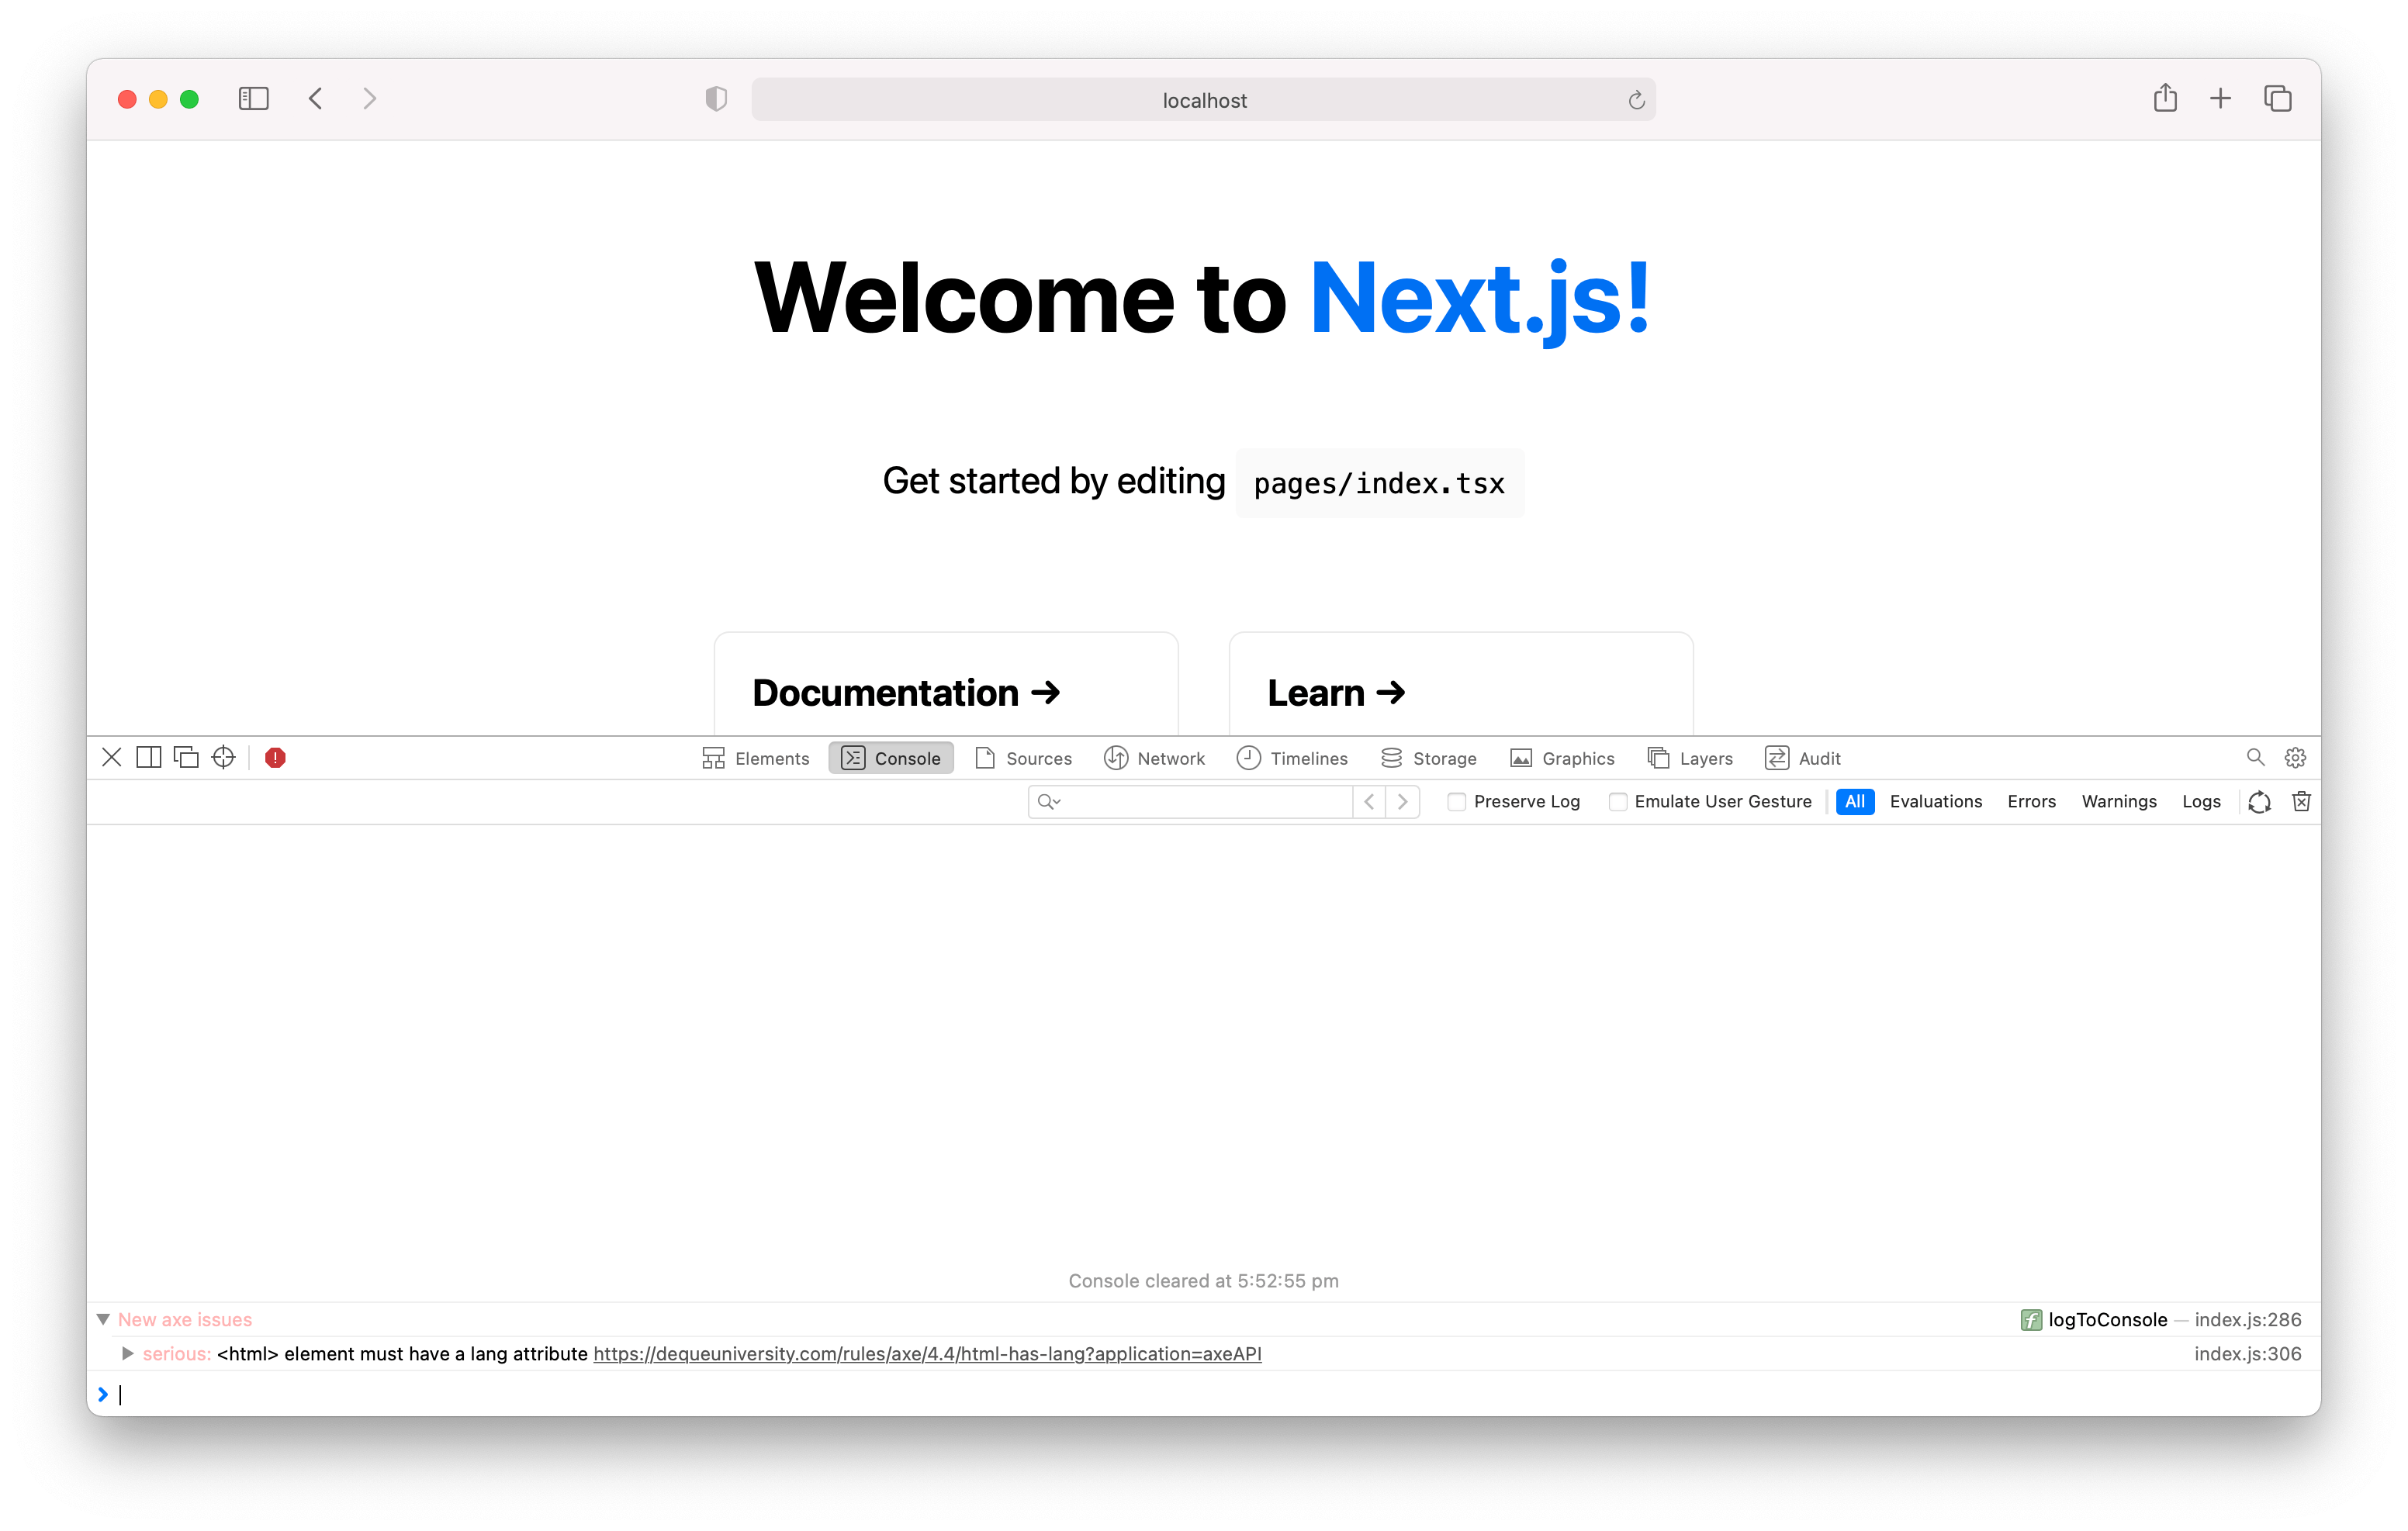 Browser screenshot of the Create Next App and DevTools console with one serious accessibility issue